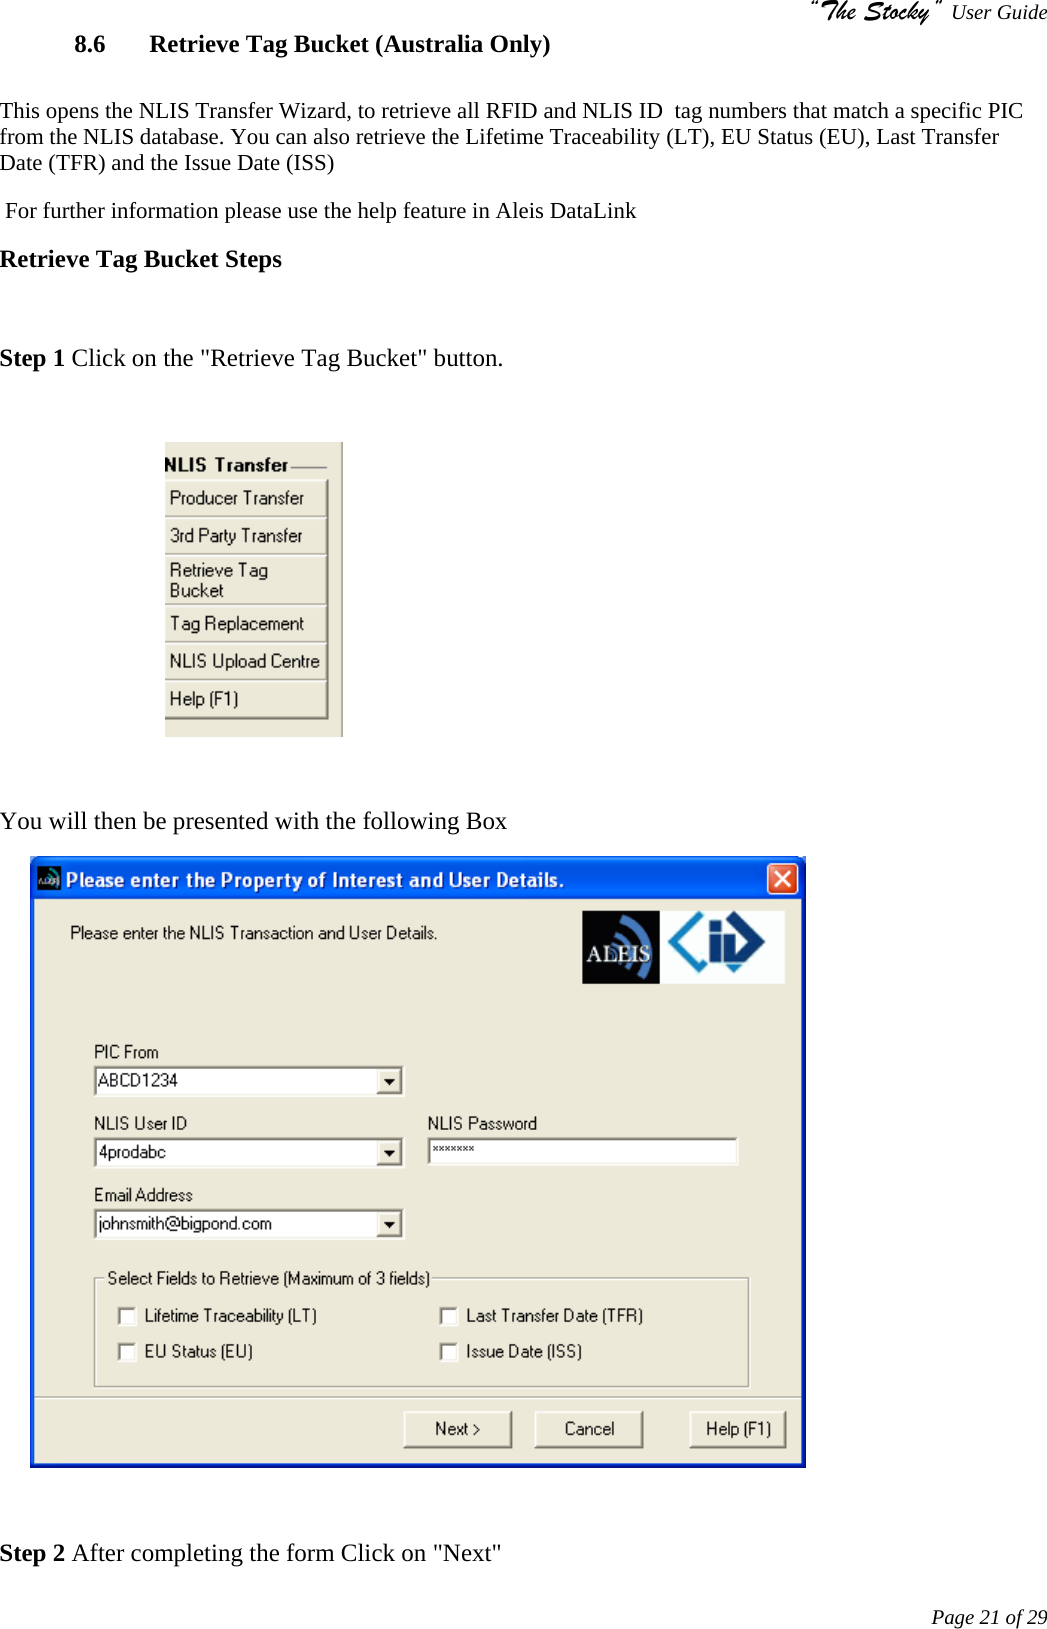 “The Stocky” User Guide     Page 21 of 29 8.6  Retrieve Tag Bucket (Australia Only)  This opens the NLIS Transfer Wizard, to retrieve all RFID and NLIS ID  tag numbers that match a specific PIC from the NLIS database. You can also retrieve the Lifetime Traceability (LT), EU Status (EU), Last Transfer Date (TFR) and the Issue Date (ISS)                                                                                                     For further information please use the help feature in Aleis DataLink Retrieve Tag Bucket Steps  Step 1 Click on the &quot;Retrieve Tag Bucket&quot; button.                             You will then be presented with the following Box         Step 2 After completing the form Click on &quot;Next&quot; 